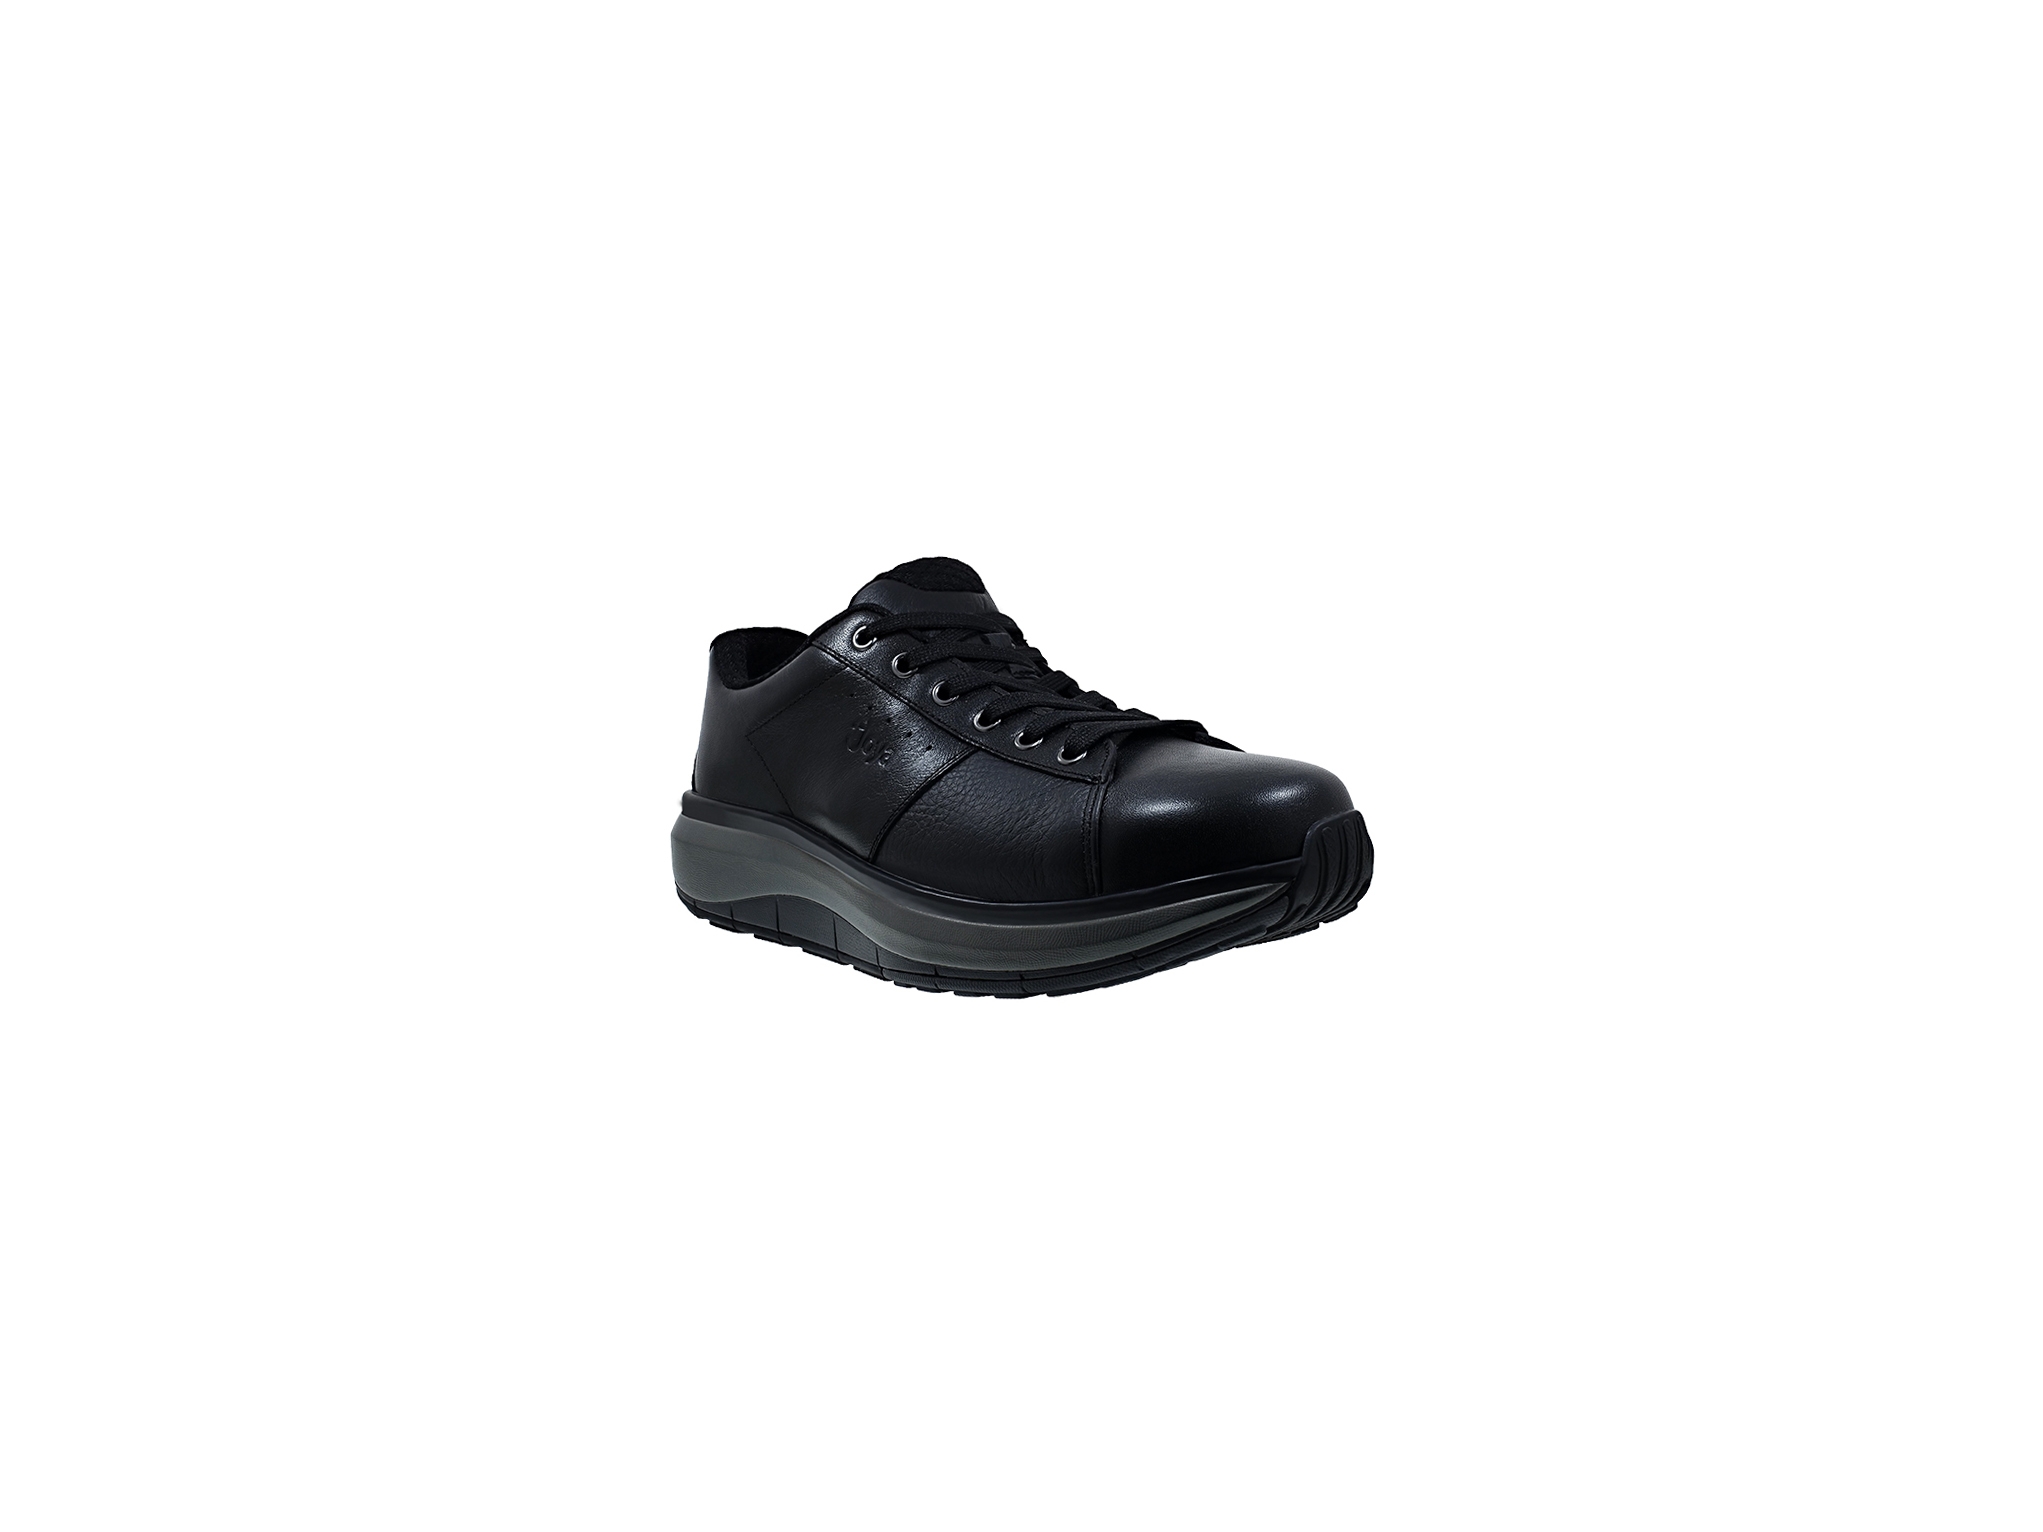 Mens Joya Malibu M SR – Black Casual Shoes – Lace-Up – Suitable For Orthotics / Heel Spurs – Size 9.5 – Leather / Synthetic Fabric